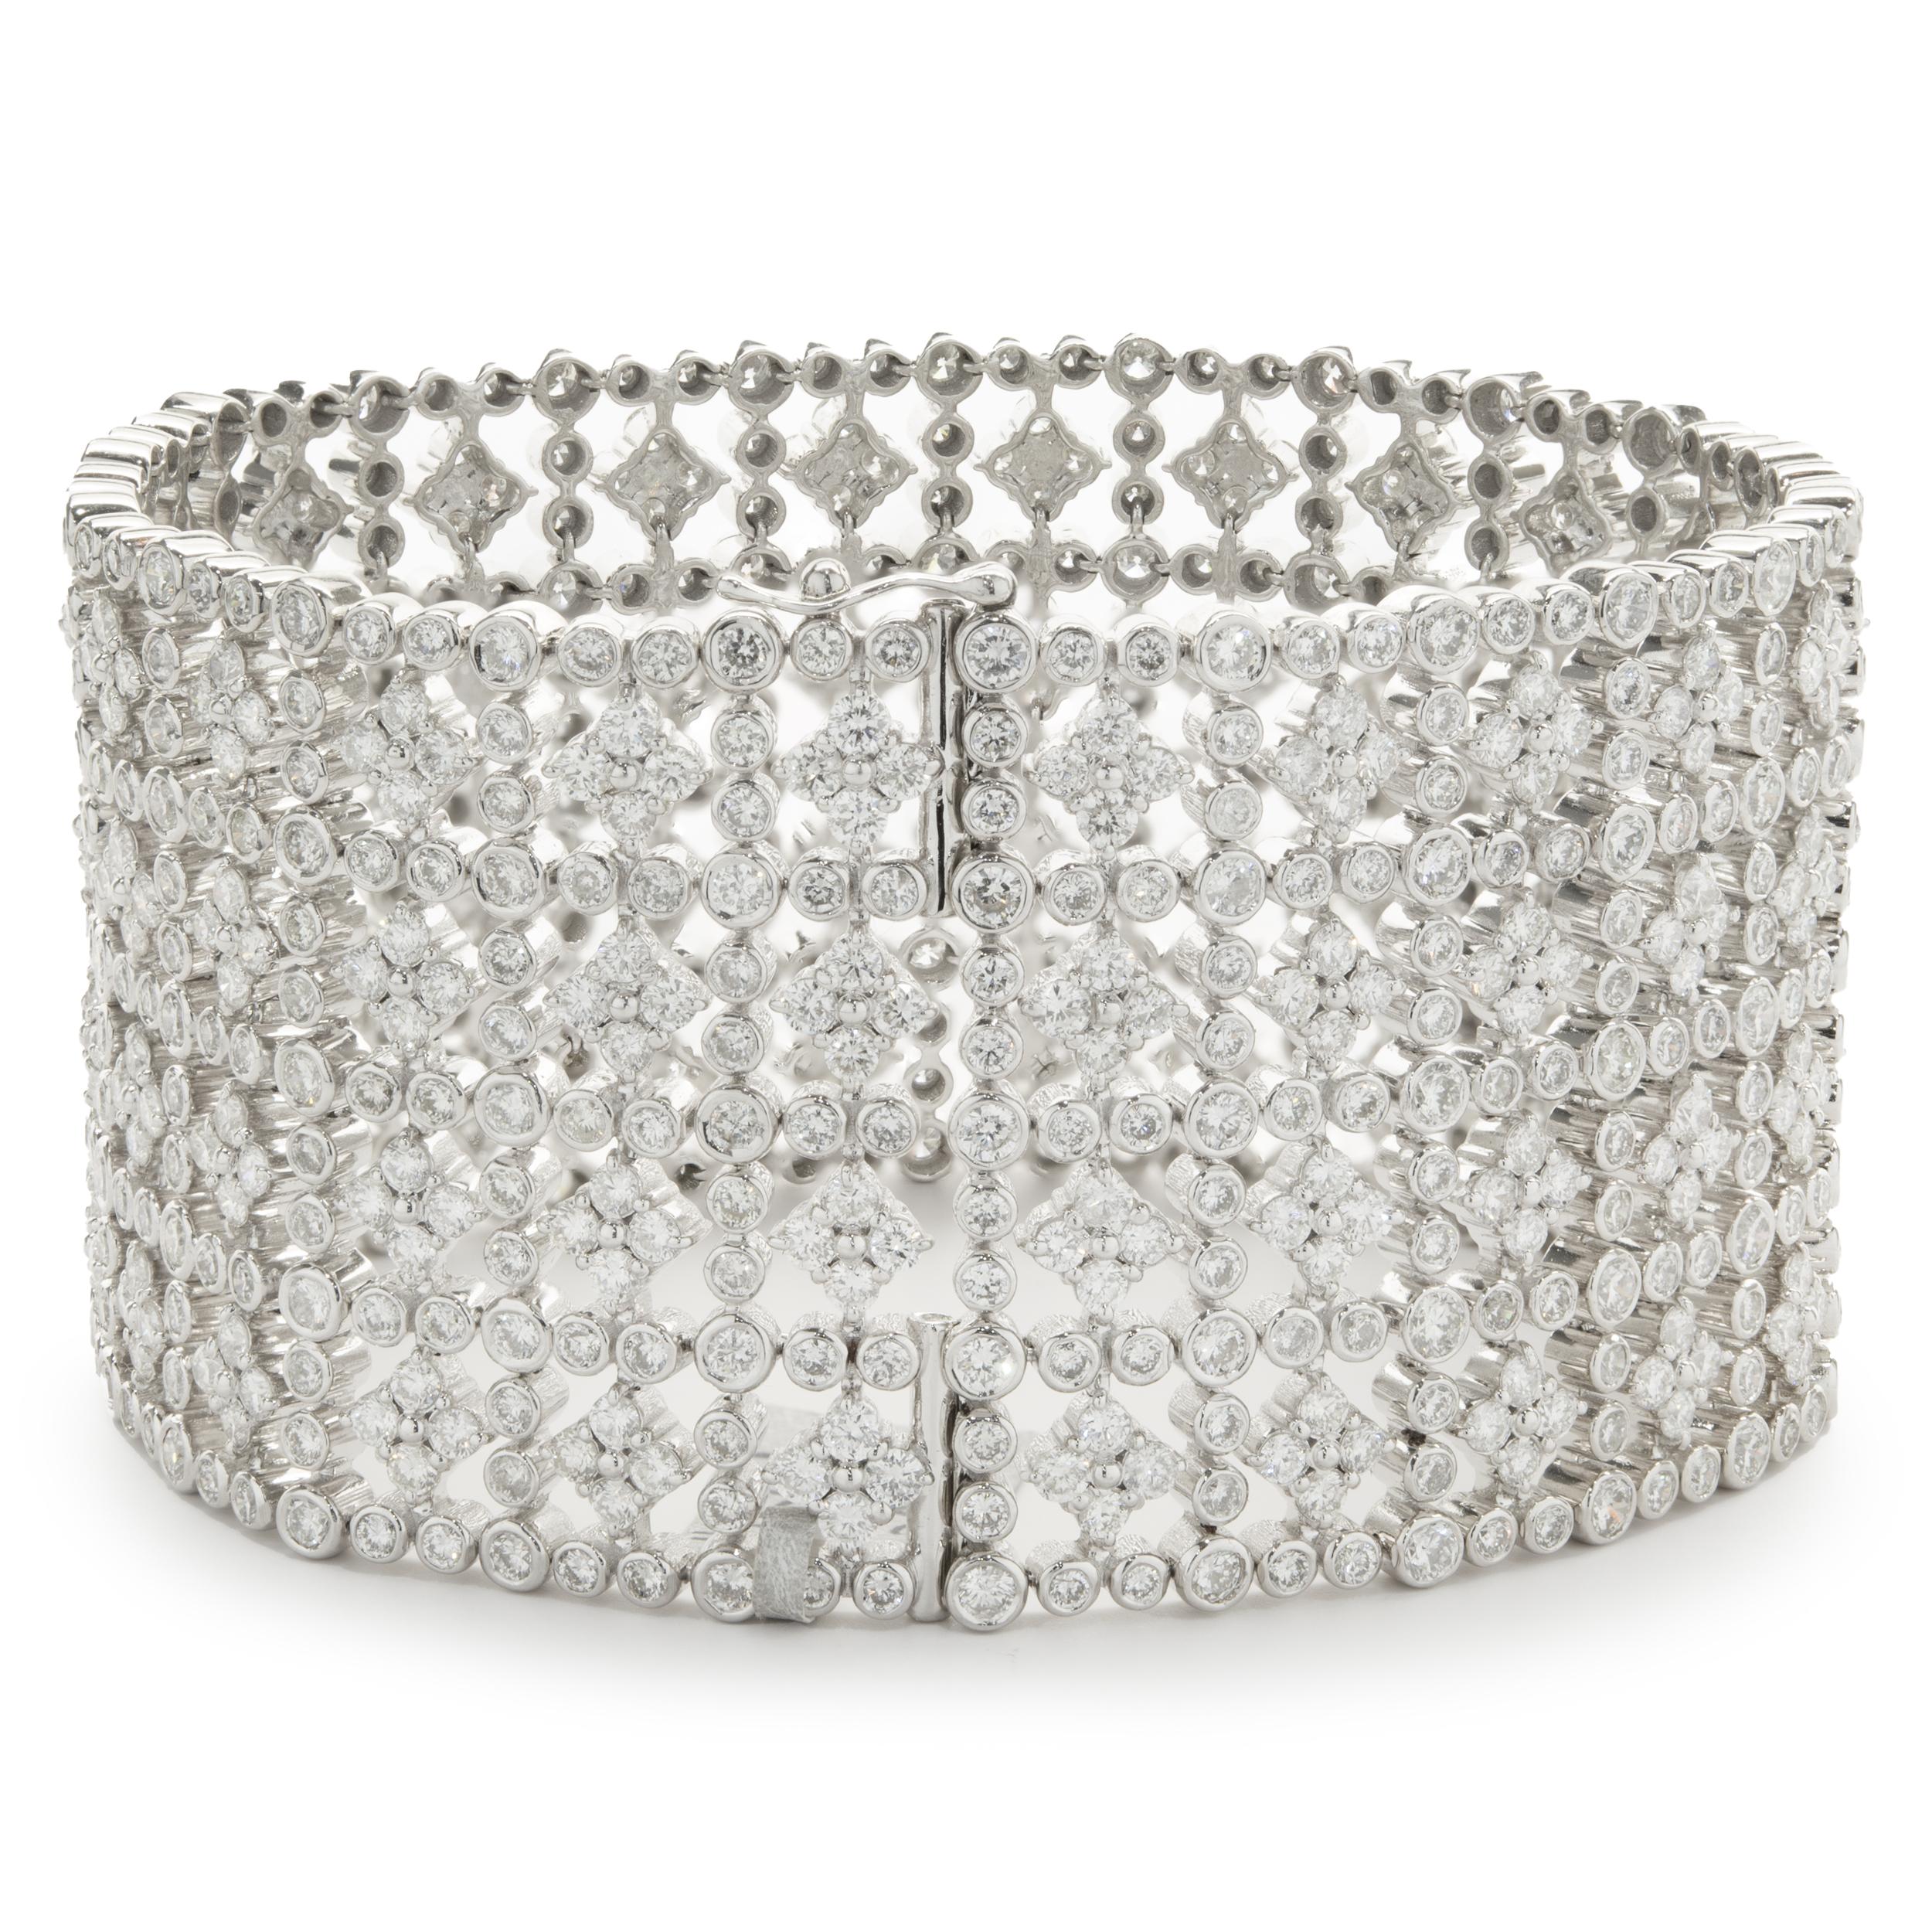 Designer: custom design
Material: 14K white gold
Diamonds: 866 round brilliant cut = 33.86cttw
Color: F / G
Clarity: VS1-2
Dimensions: bracelet measures 7.25-inches in length 
Weight: 90.31 grams
